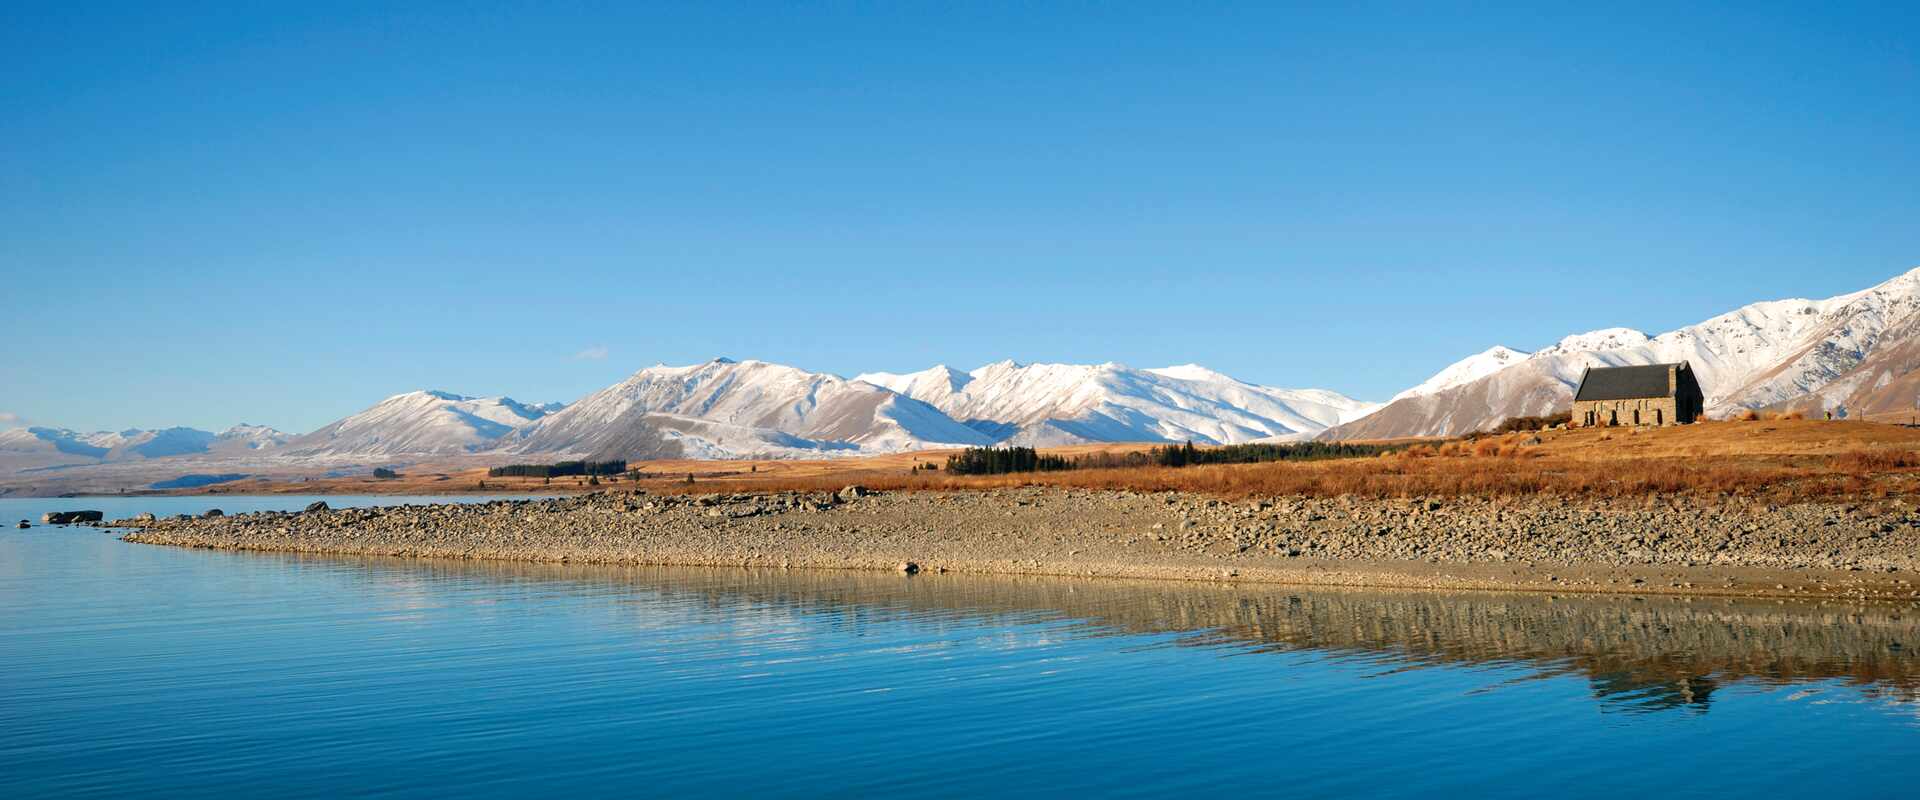 View of Lake Tekapo with the Church of the Good Shepherd and mountains in background, New Zealand